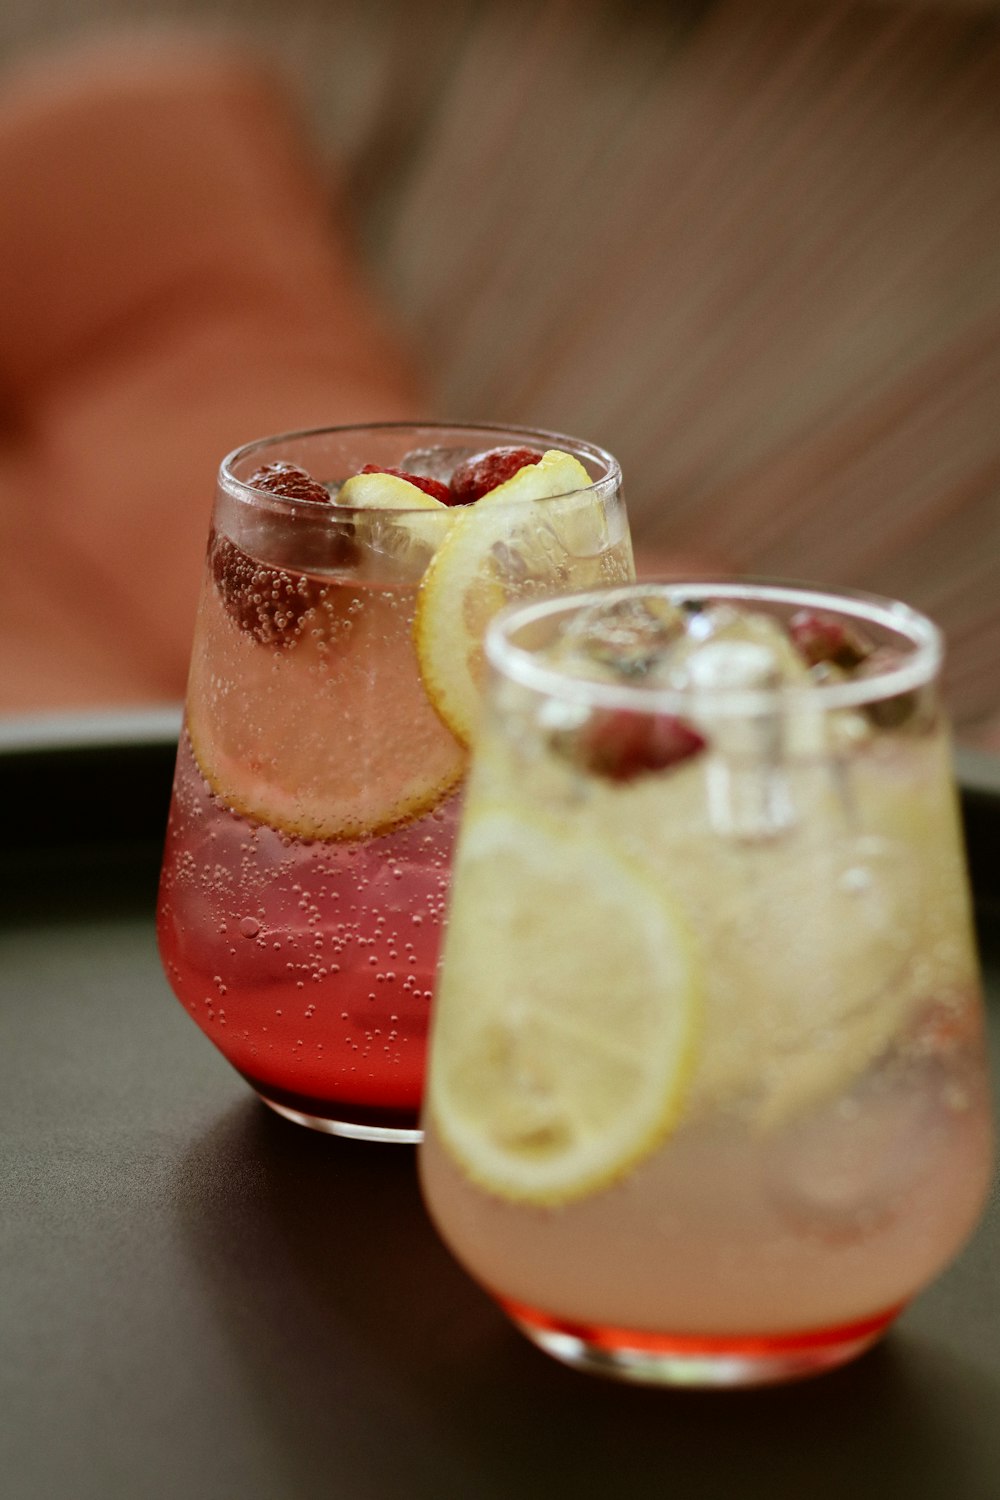 clear drinking glass with red liquid and sliced lemon